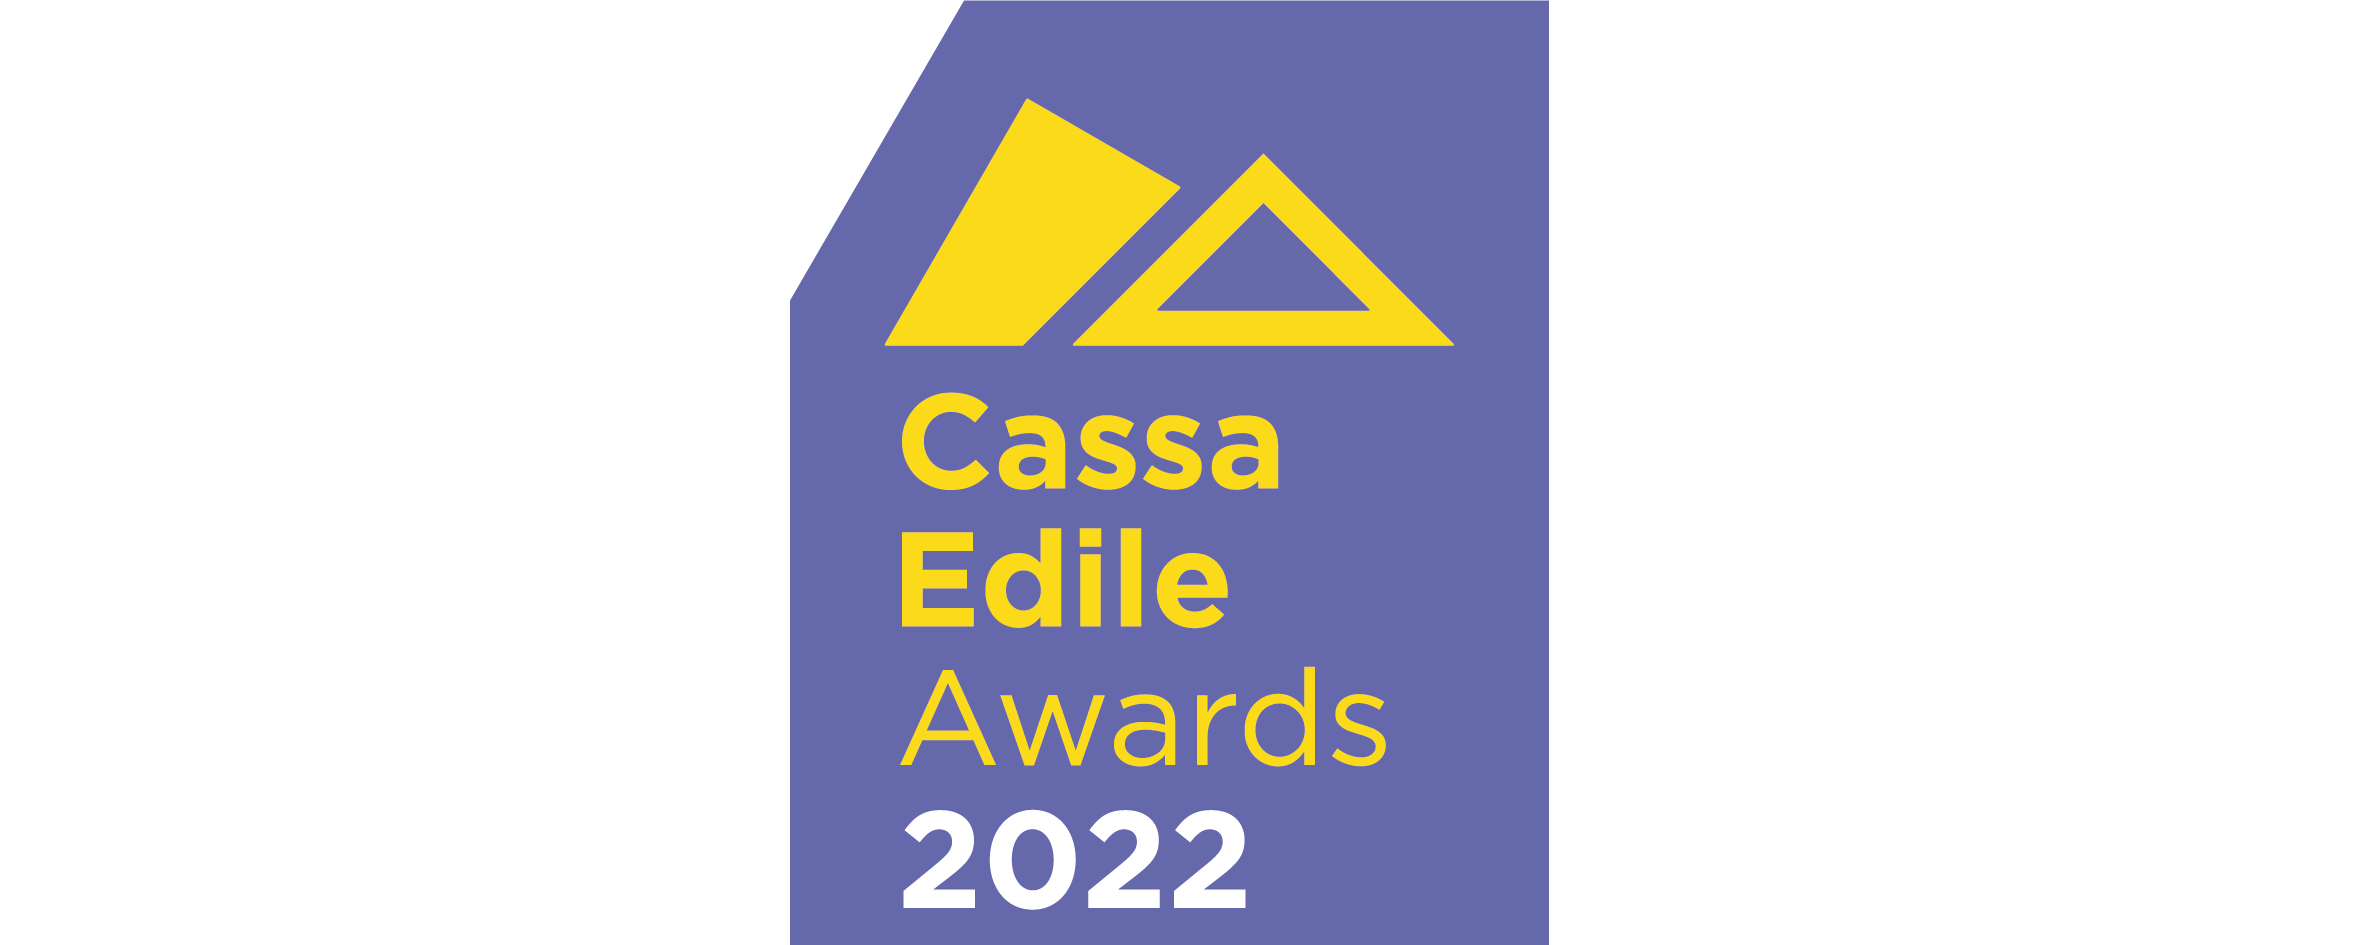 CASSA EDILE AWARDS 2022: SOLESI S.P.A. WINS PRIZE FOR TWO CATEGORIES